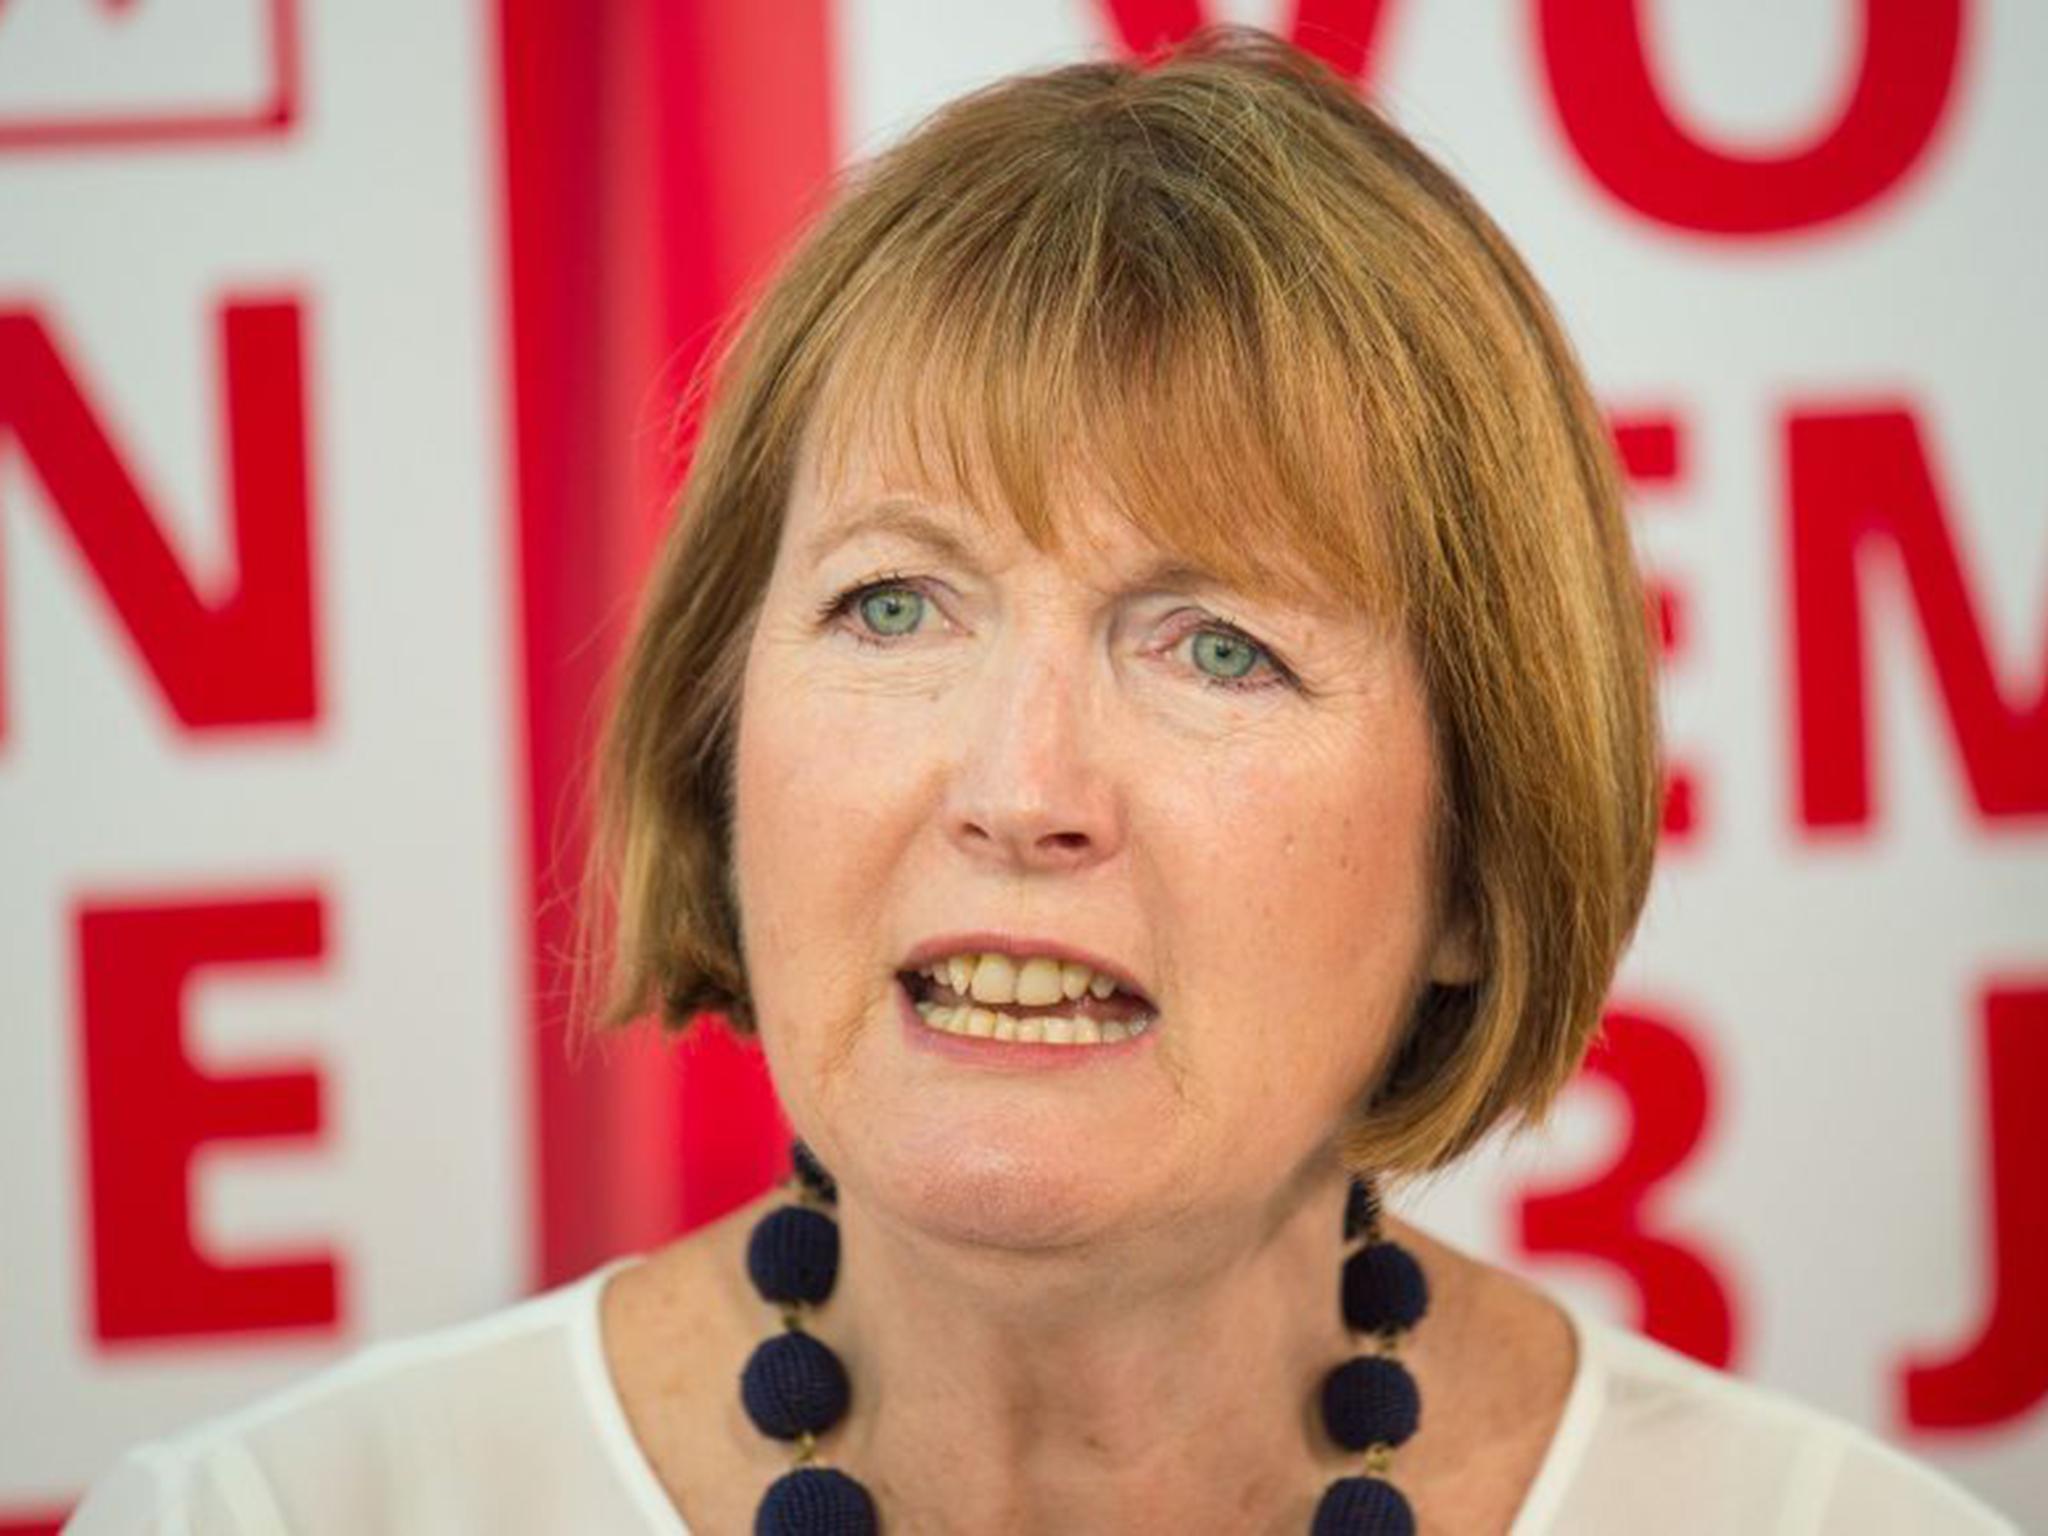 Harriet Harman took aim at Tory MP Jacob Rees-Mogg over his failure to change a nappy despite having six children